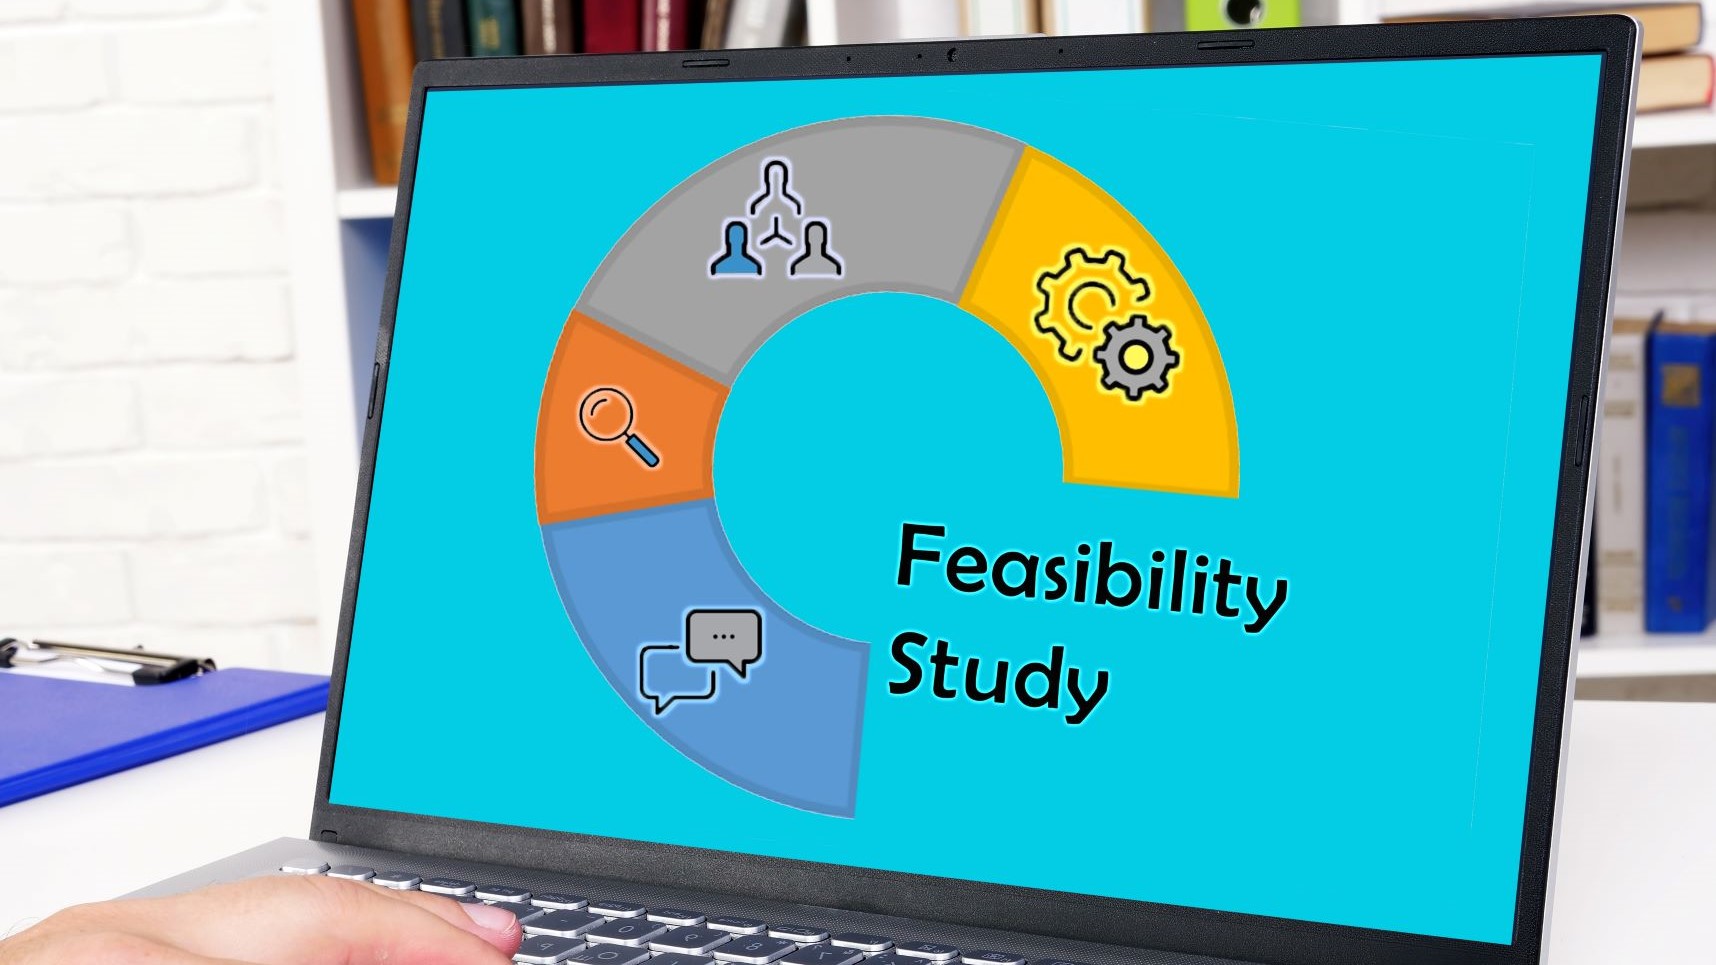 Before Putting Money Into a Self-Storage Investment, Learn to Conduct Your Own Desktop Feasibility Study!